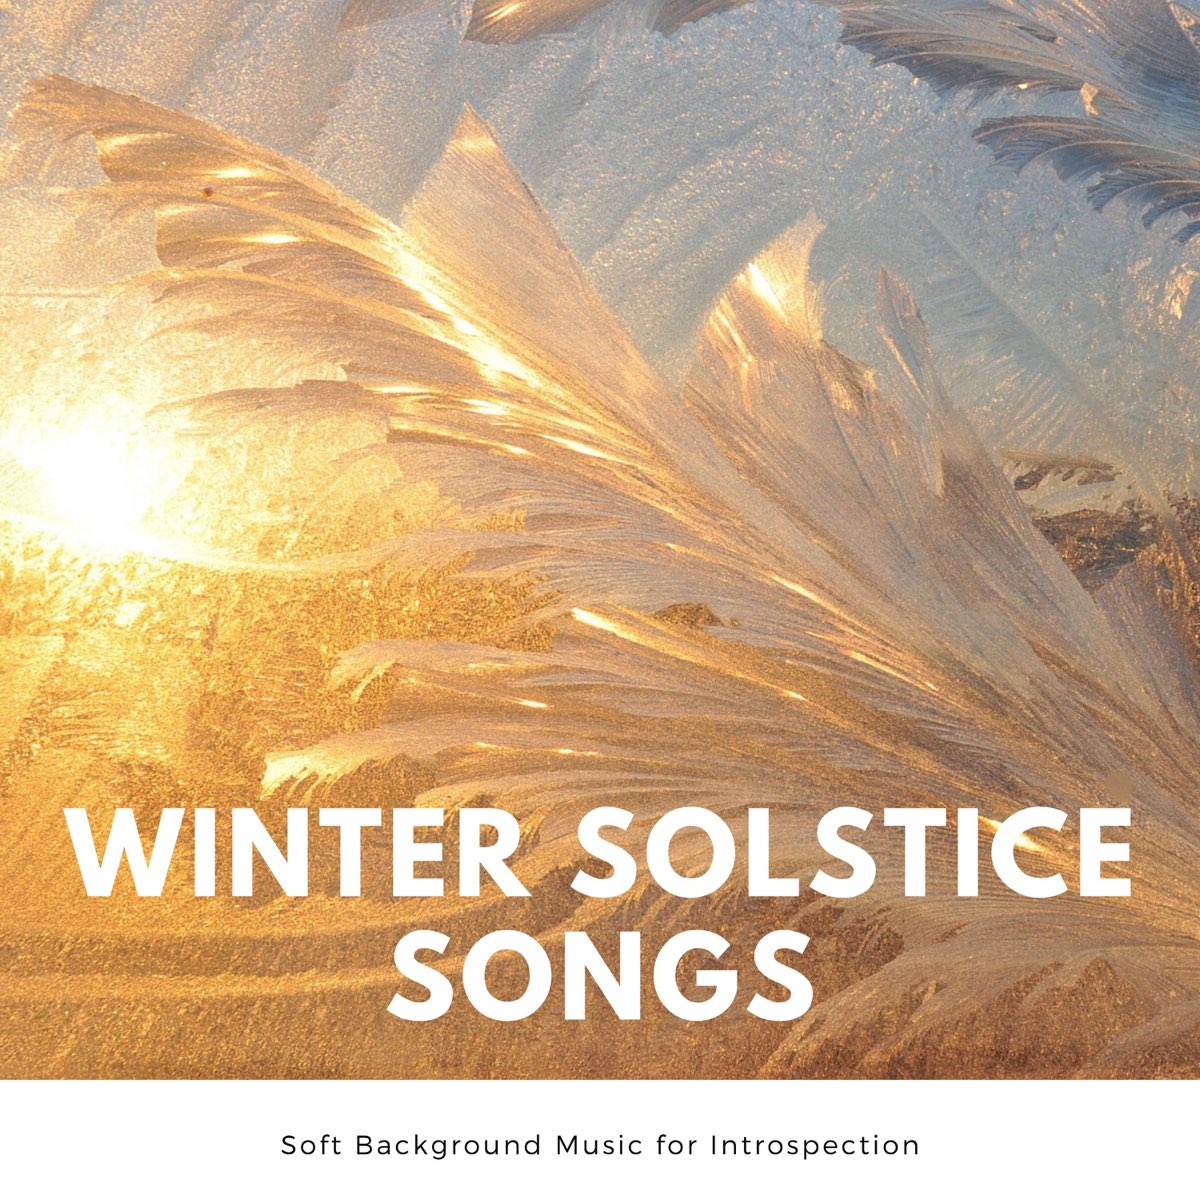 Winter Solstice Songs - Soft Background Music for Introspection by Daily  Meditation Society on Apple Music